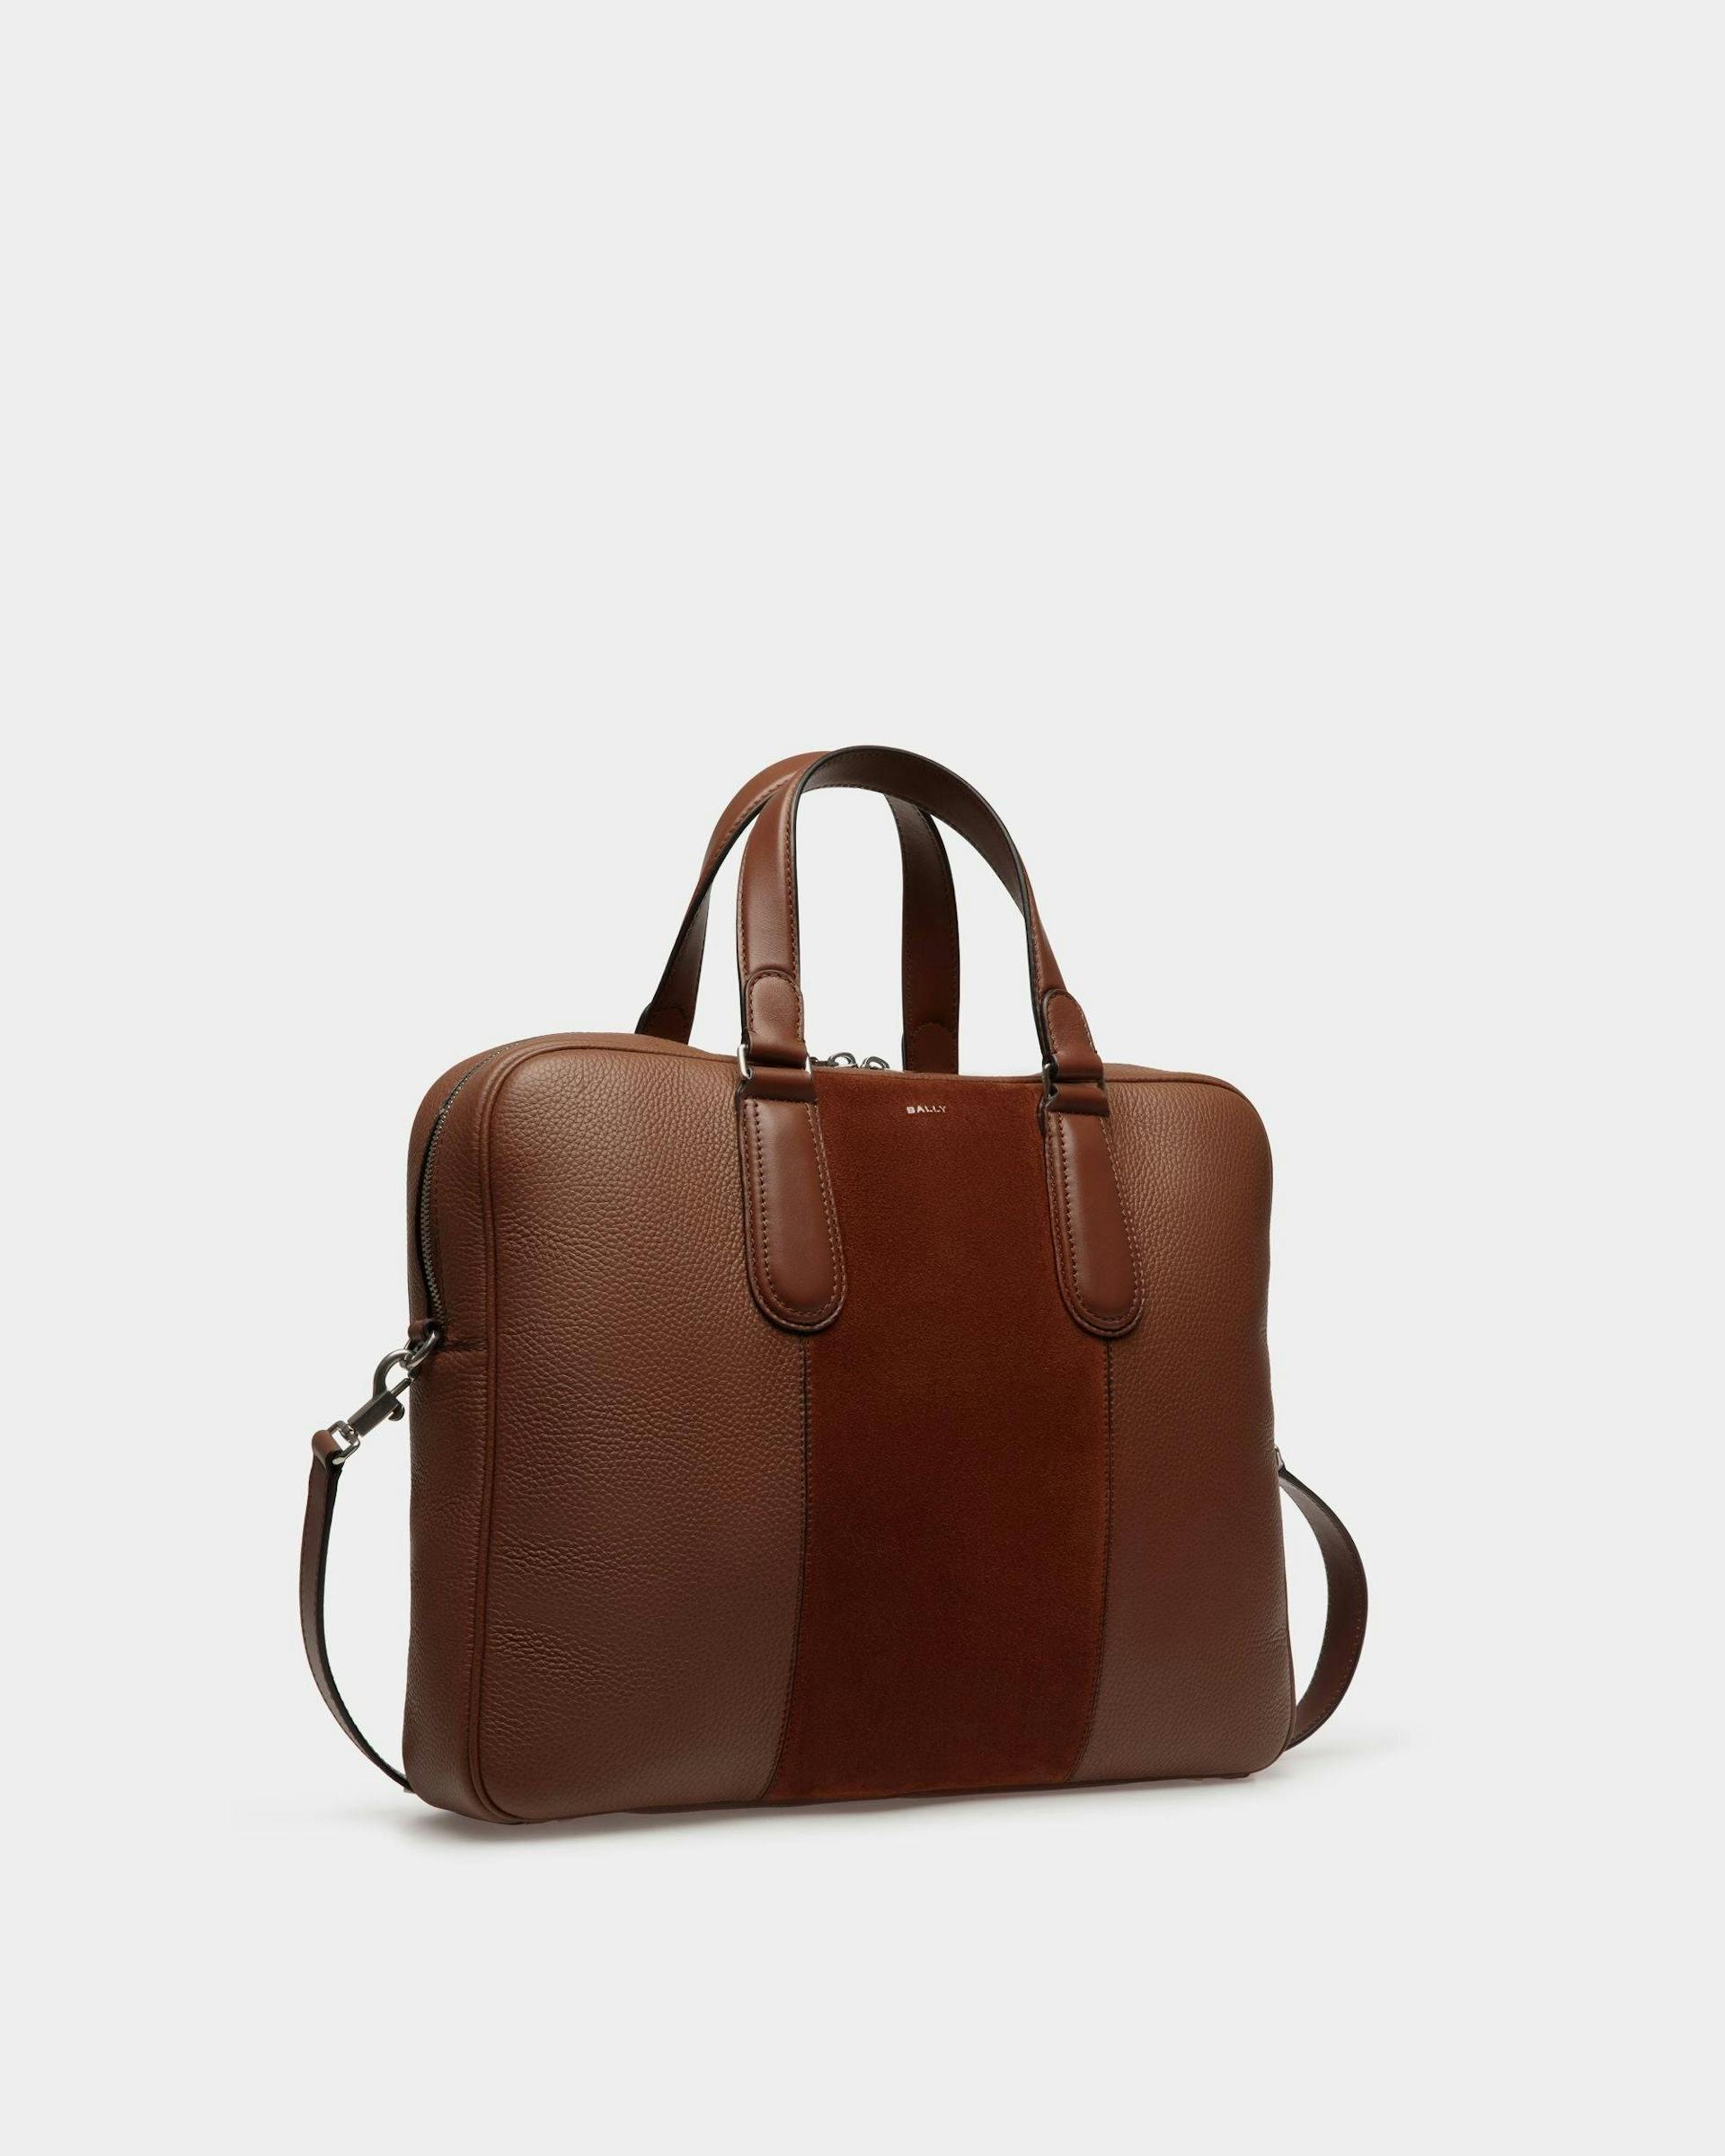 Men's Spin Briefcase in Brown Leather | Bally | Still Life 3/4 Front